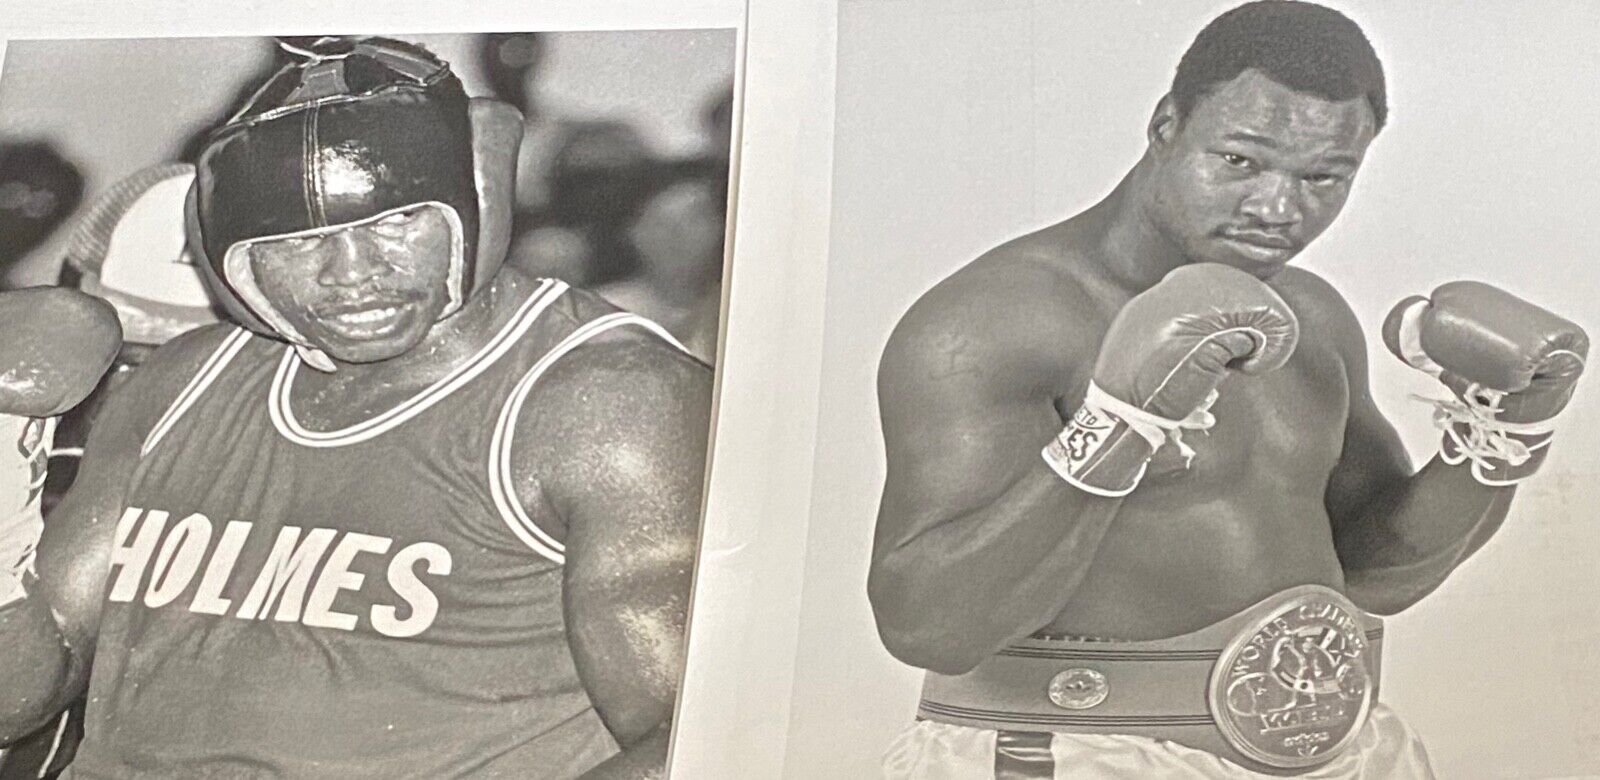 LARRY HOLMES 1982 TRAINING PHOTOS ( 8 x 10) pre WBC TITLE BOUT with GERRY COONEY Don King Productions - фотография #12